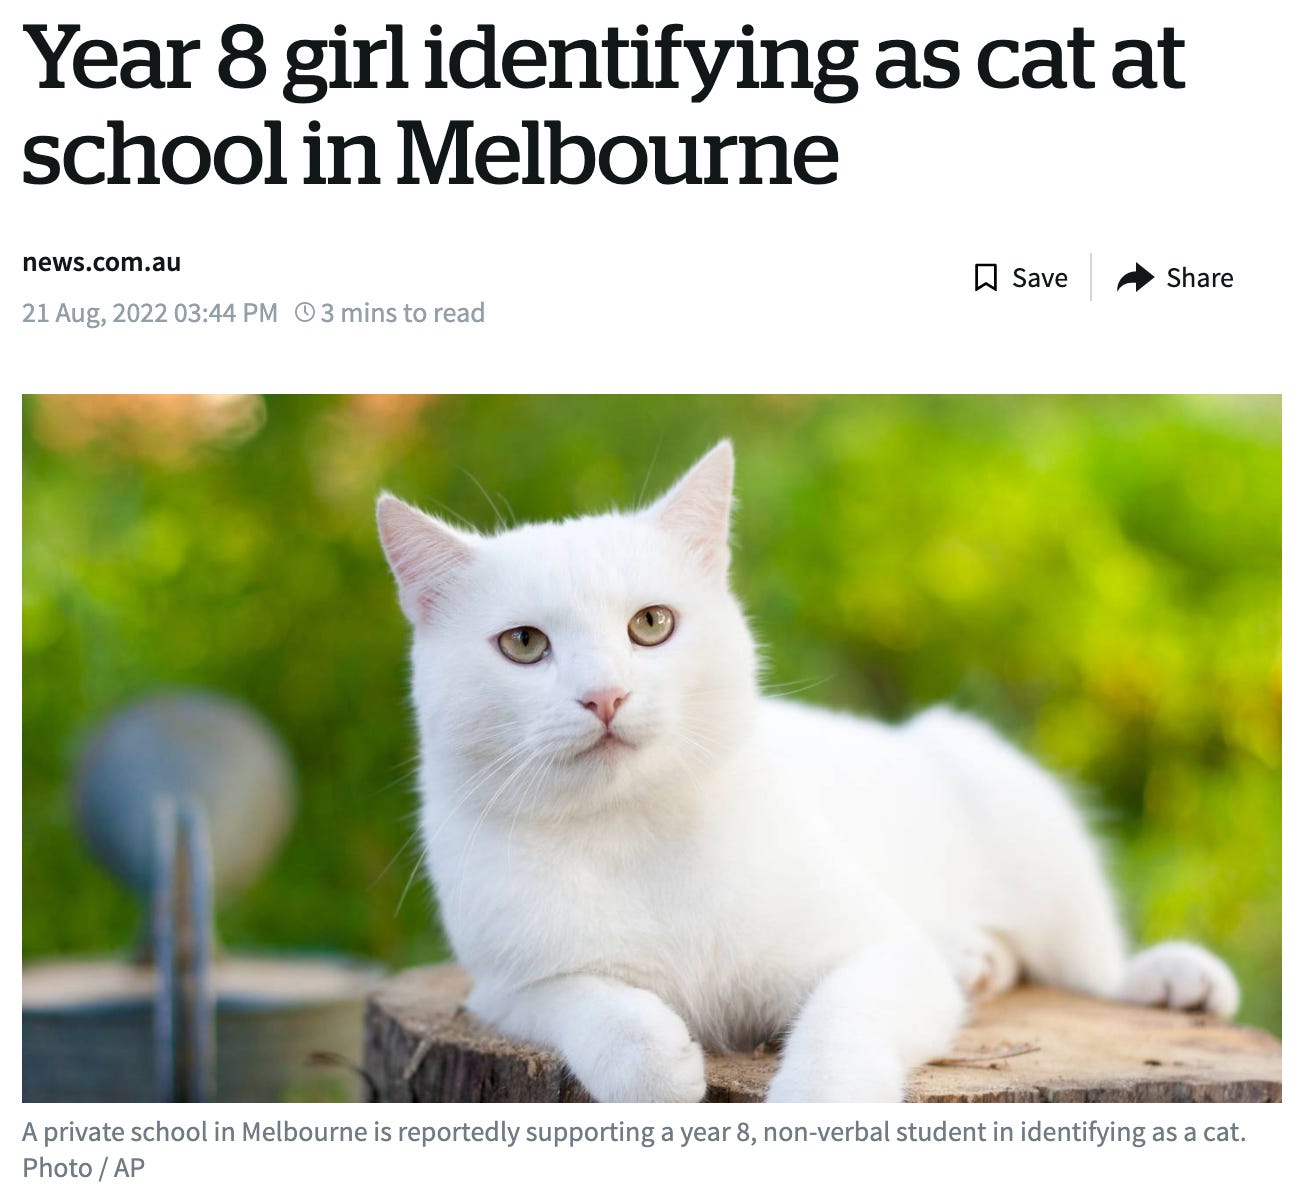 "Year 8 Girl Identifying as a cat at school in Melbourne"